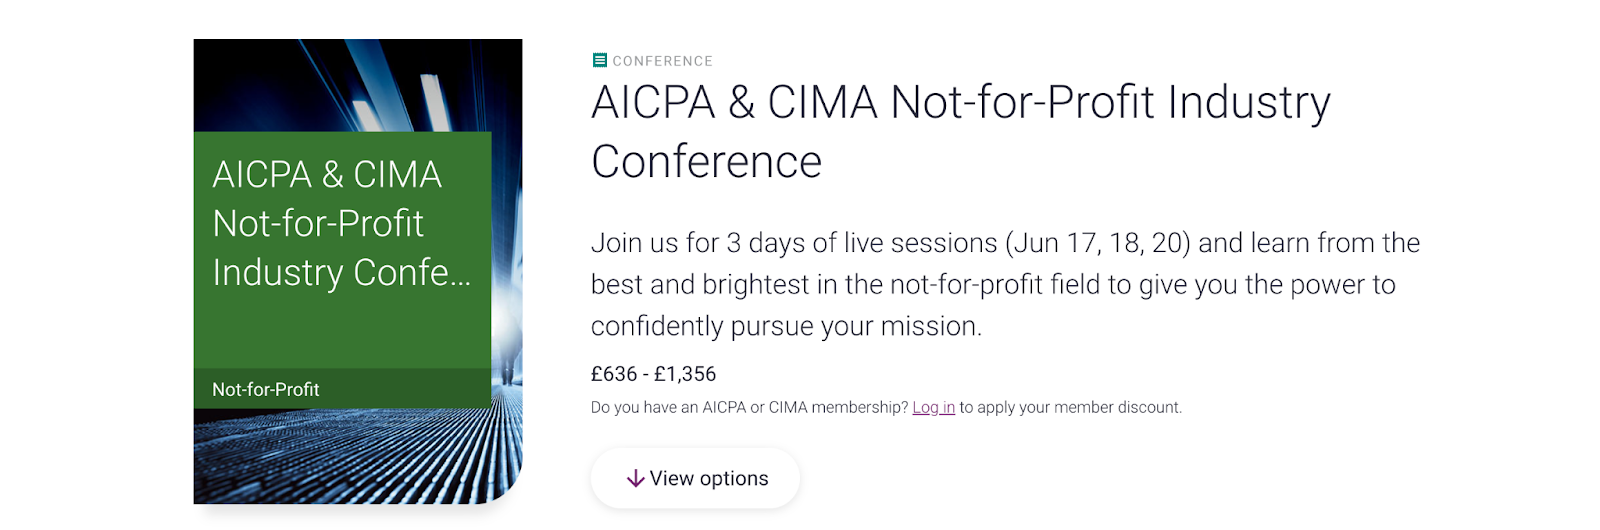 2024 accounting conferences - AICPA & CIMA Not-for-Profit Industry Conference event banner